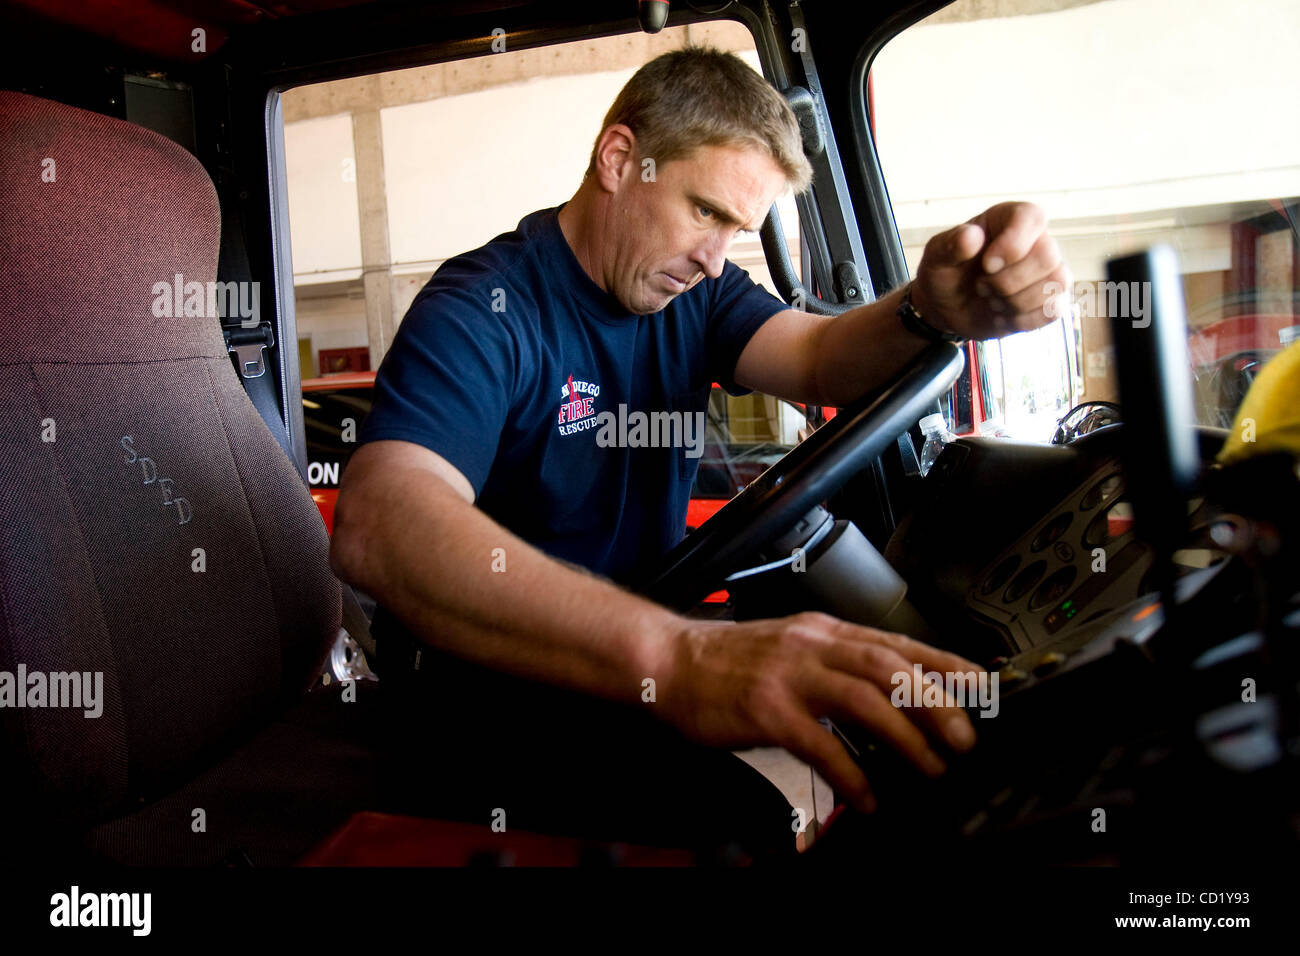 November 5, 2008 San Diego California USA Engineer Scott Fuller  does a 'pre trip' equipment check on Truck 10 at  Fire Station 10 at 4605 62nd Street in Rolando. Under the purposed budget cuts the 2 crews (either a Engine or Truck crew) per day would not be staffed on a rotating basis among the dou Stock Photo